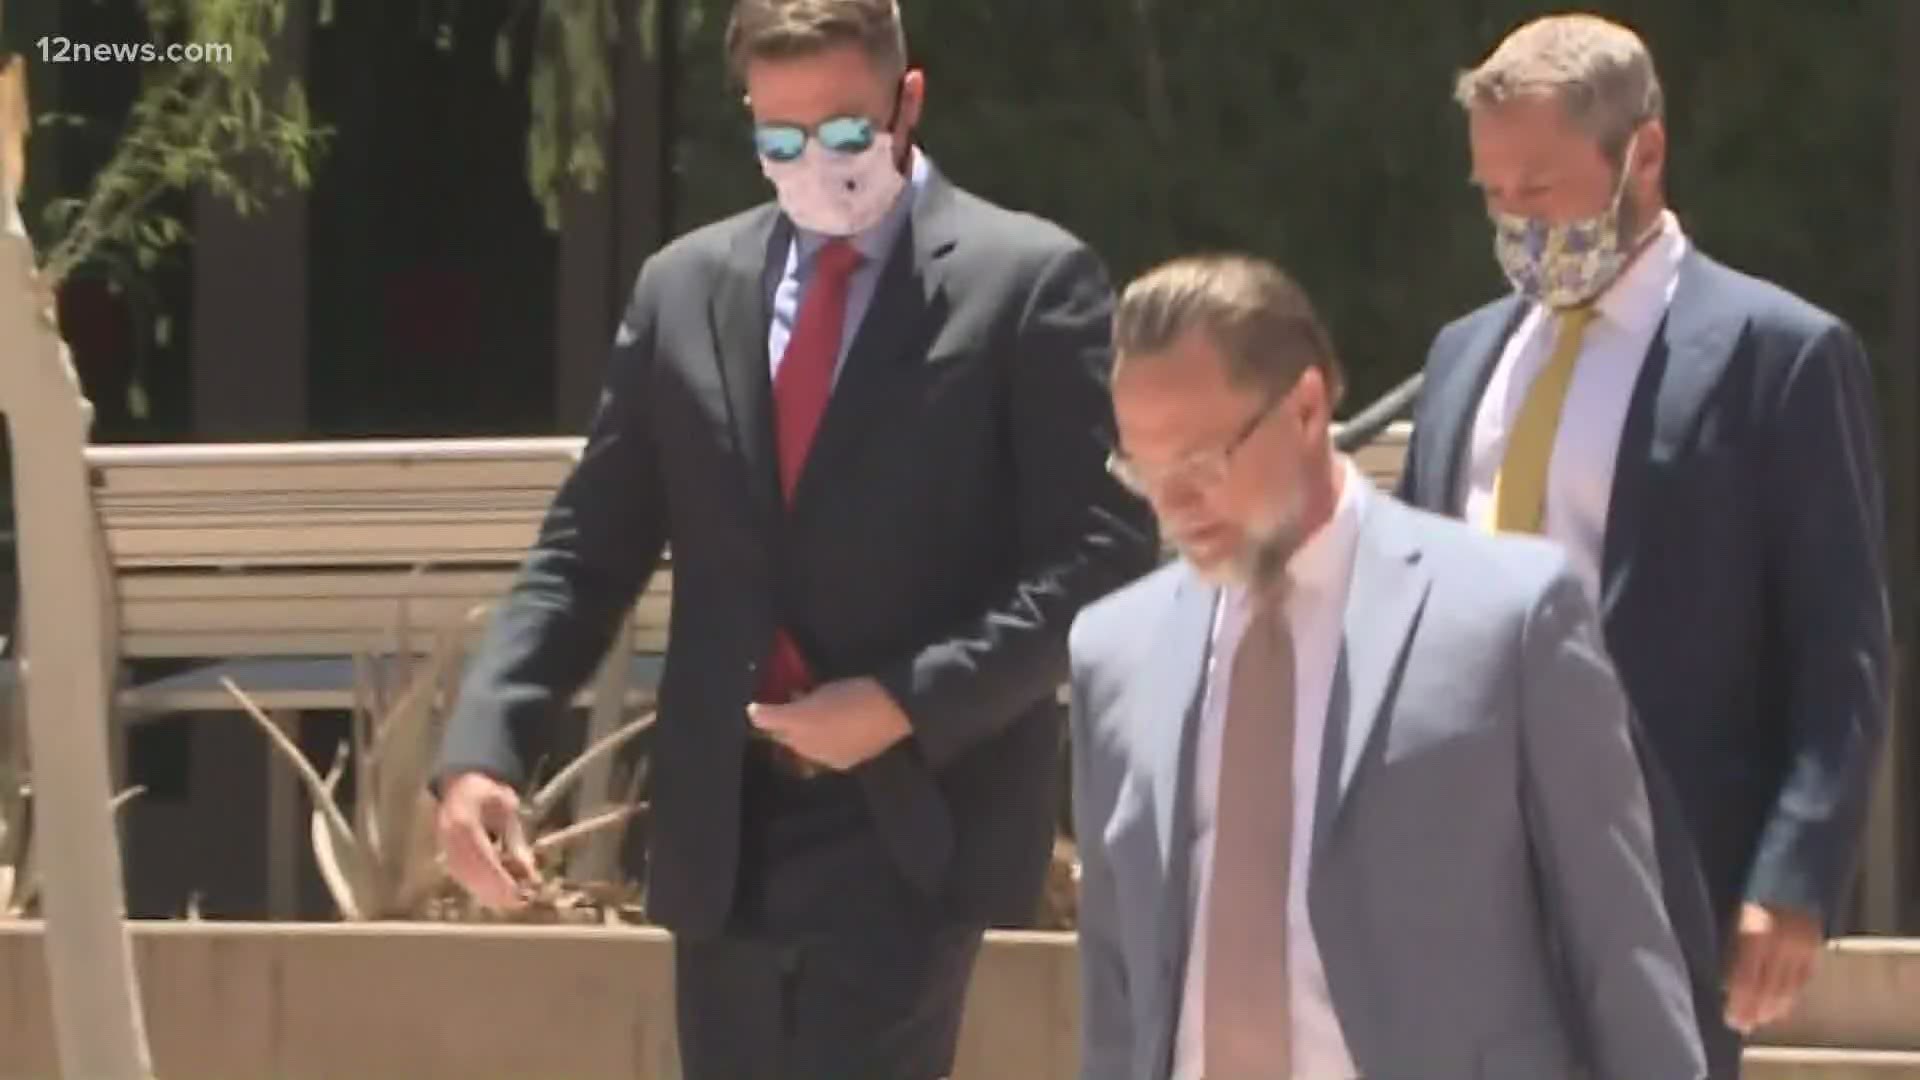 Paul Petersen pleaded guilty to charges he is facing in Arizona relating to his allegedly fraudulent adoption business.